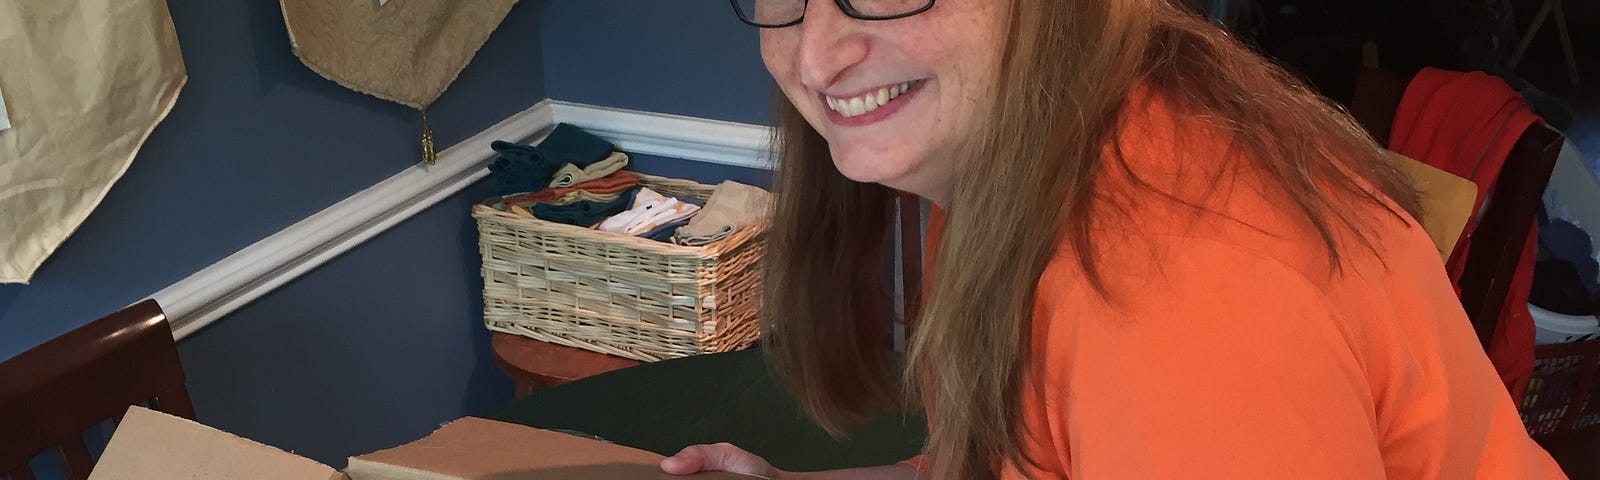 A smiling woman in an orange blouse displays a box of brightly colored books.